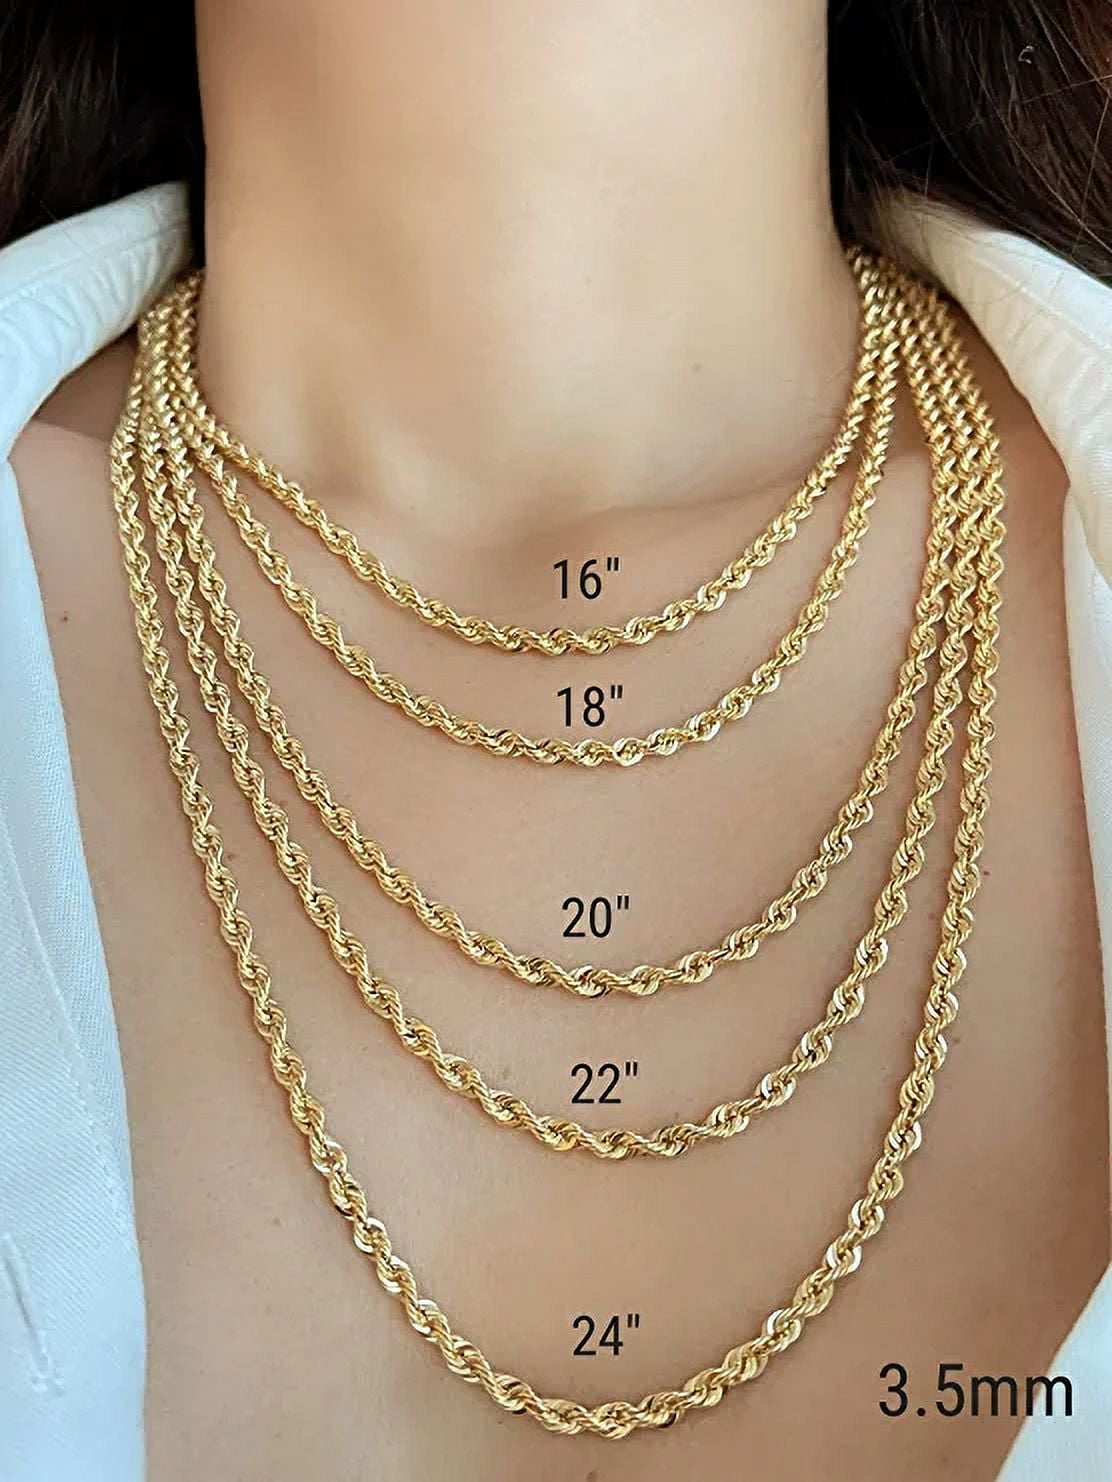 16 Inch Chain Necklace - Shop on Pinterest